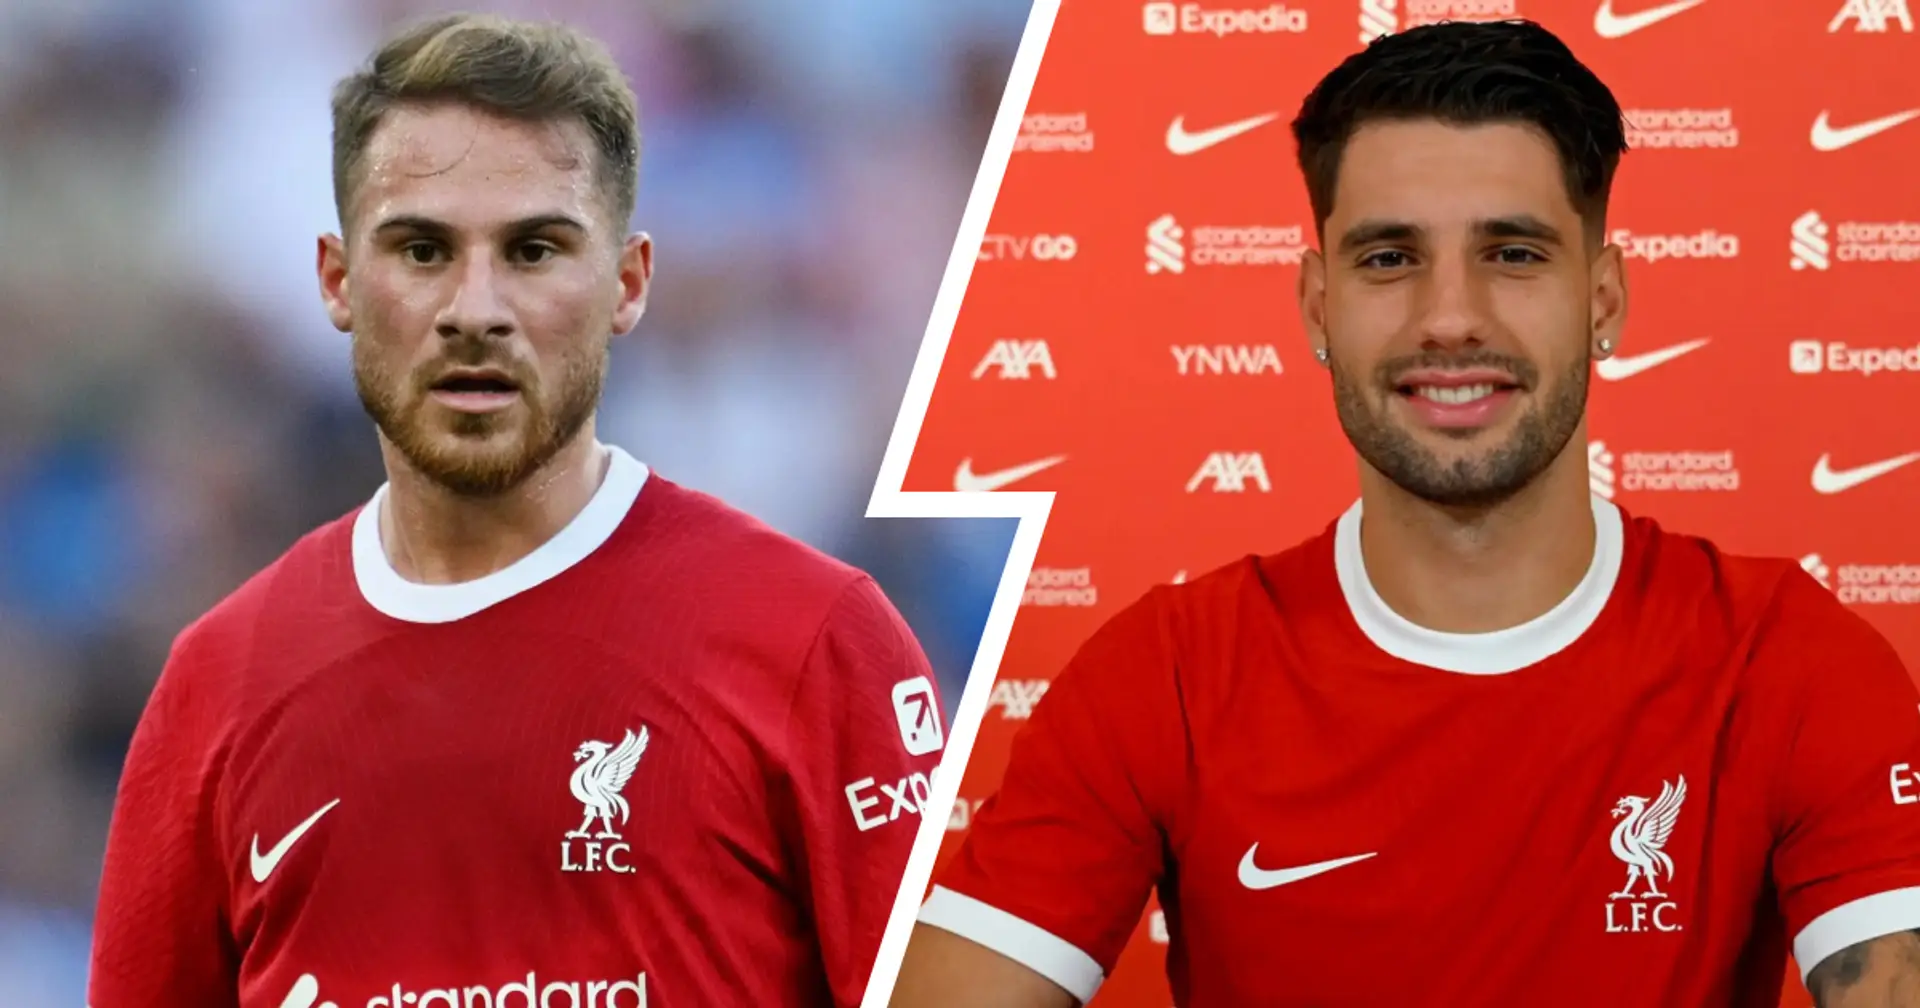 How much Liverpool underpaid for Mac Allister and Szoboszlai: analysed through data model